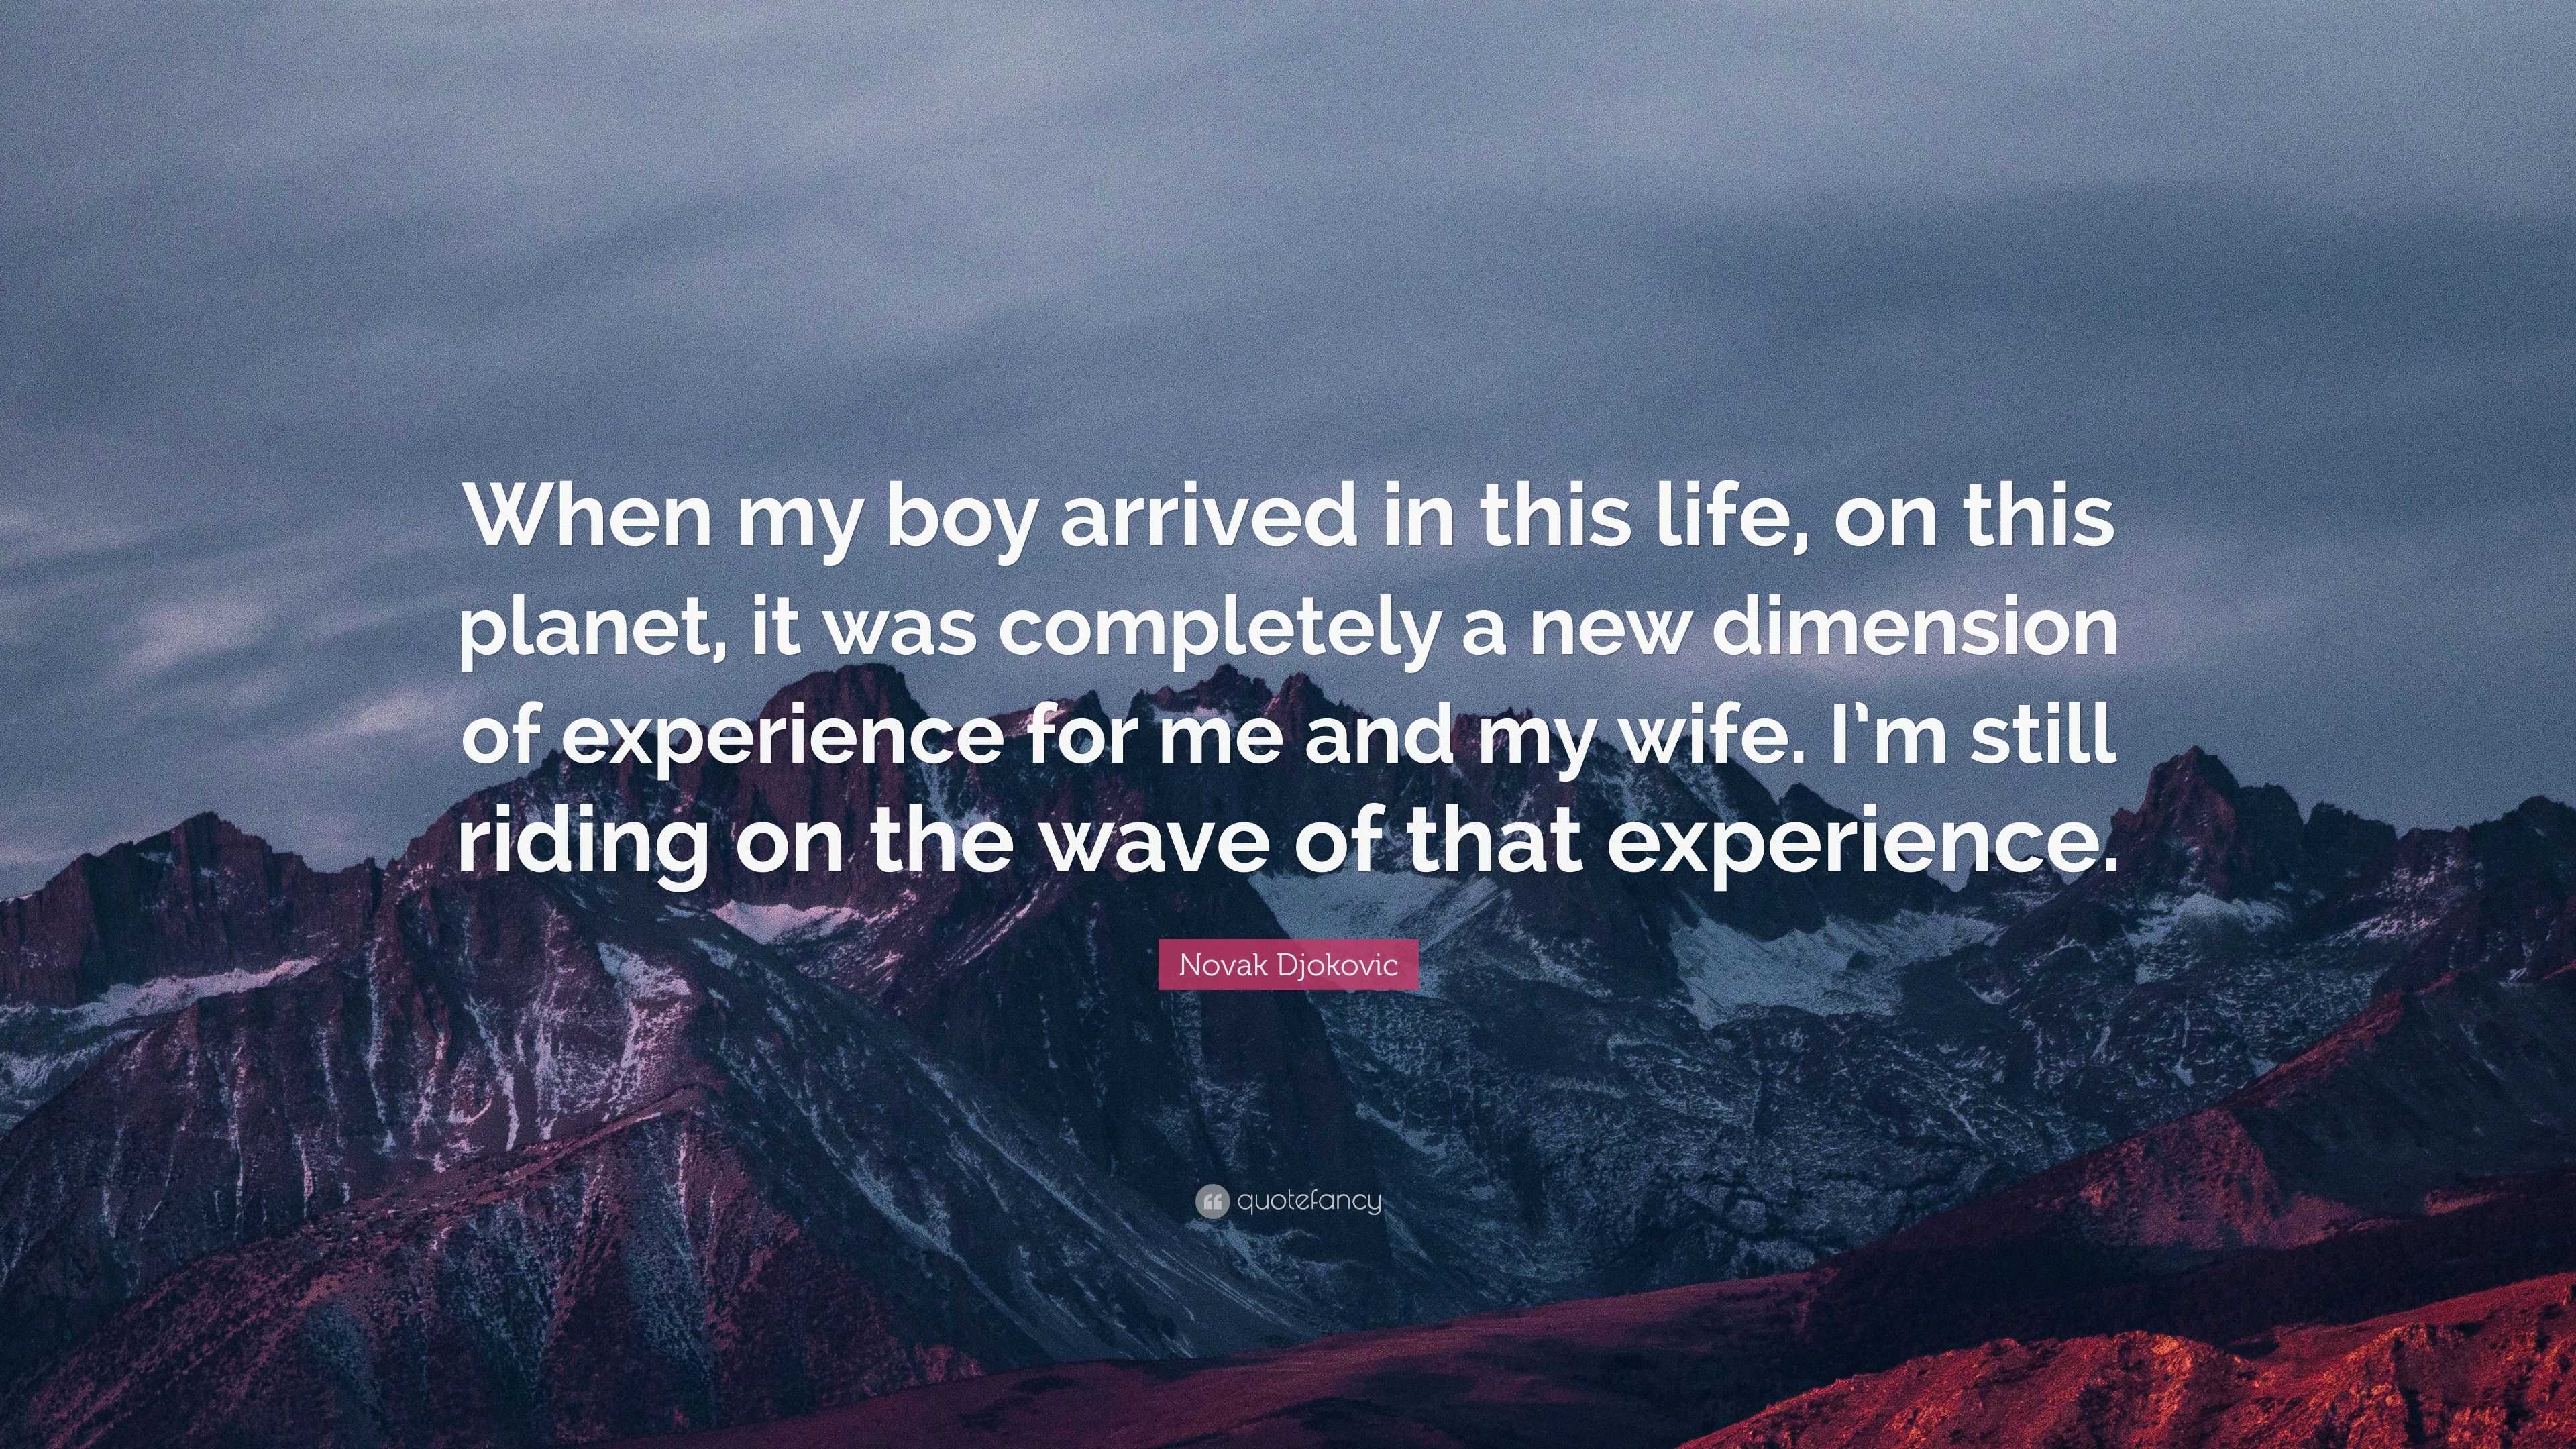 Novak Djokovic Quote: “When my boy arrived in this life, on this planet ...